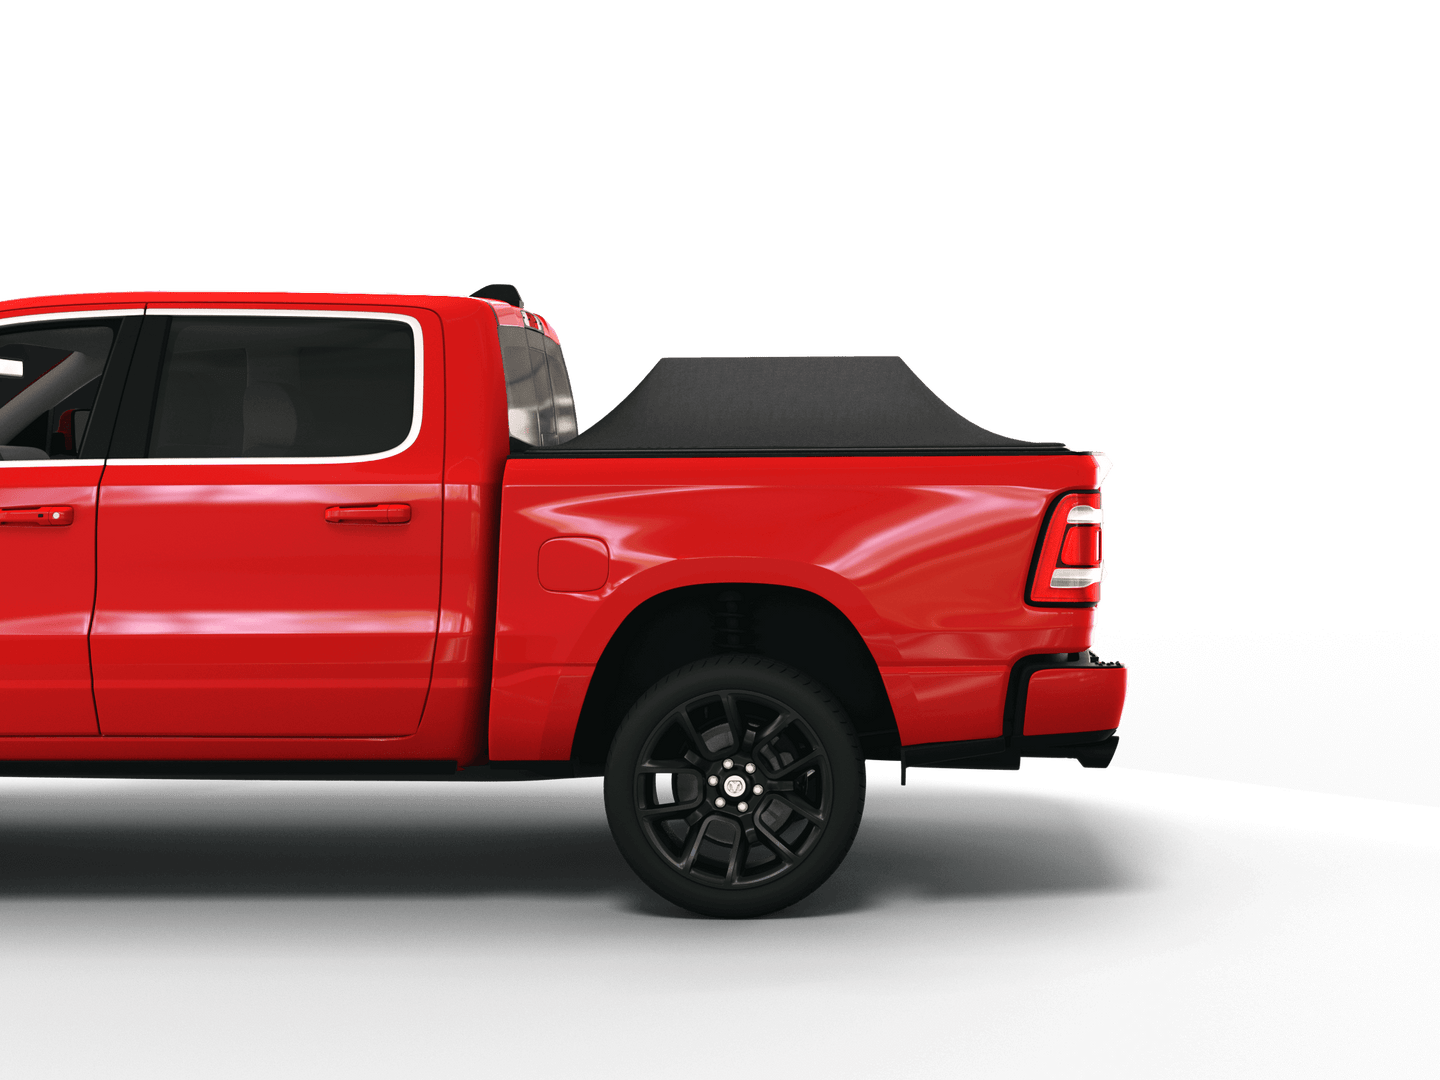 Red Ram 2500 with Sawtooth Stretch tonneau cover expanded over cargo load